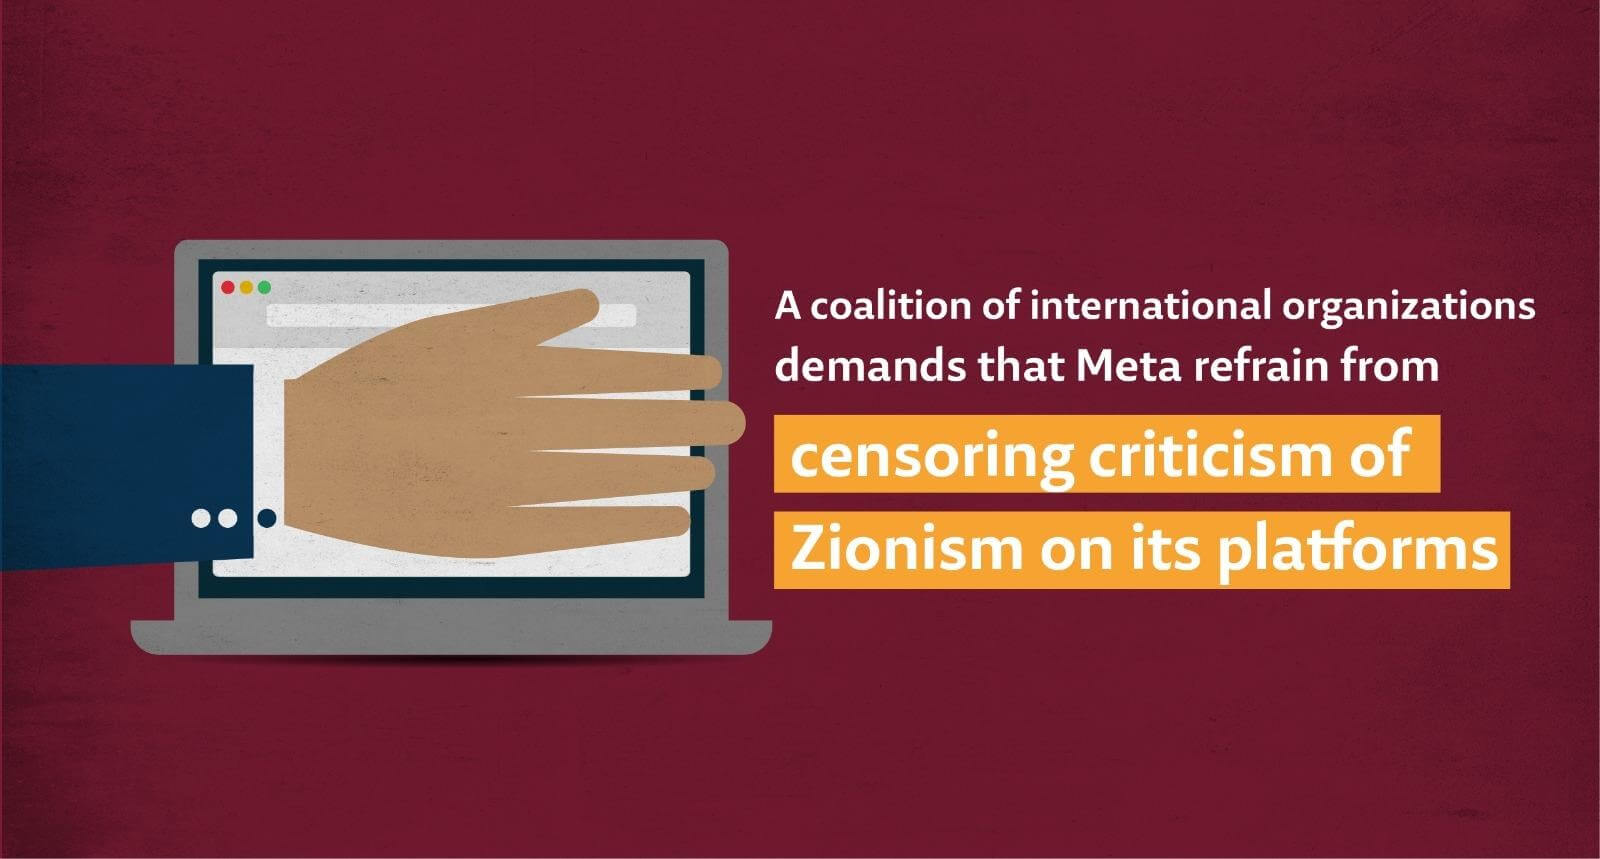 A coalition of international organizations demands that Meta refrain from censoring criticism of Zionism on its platforms